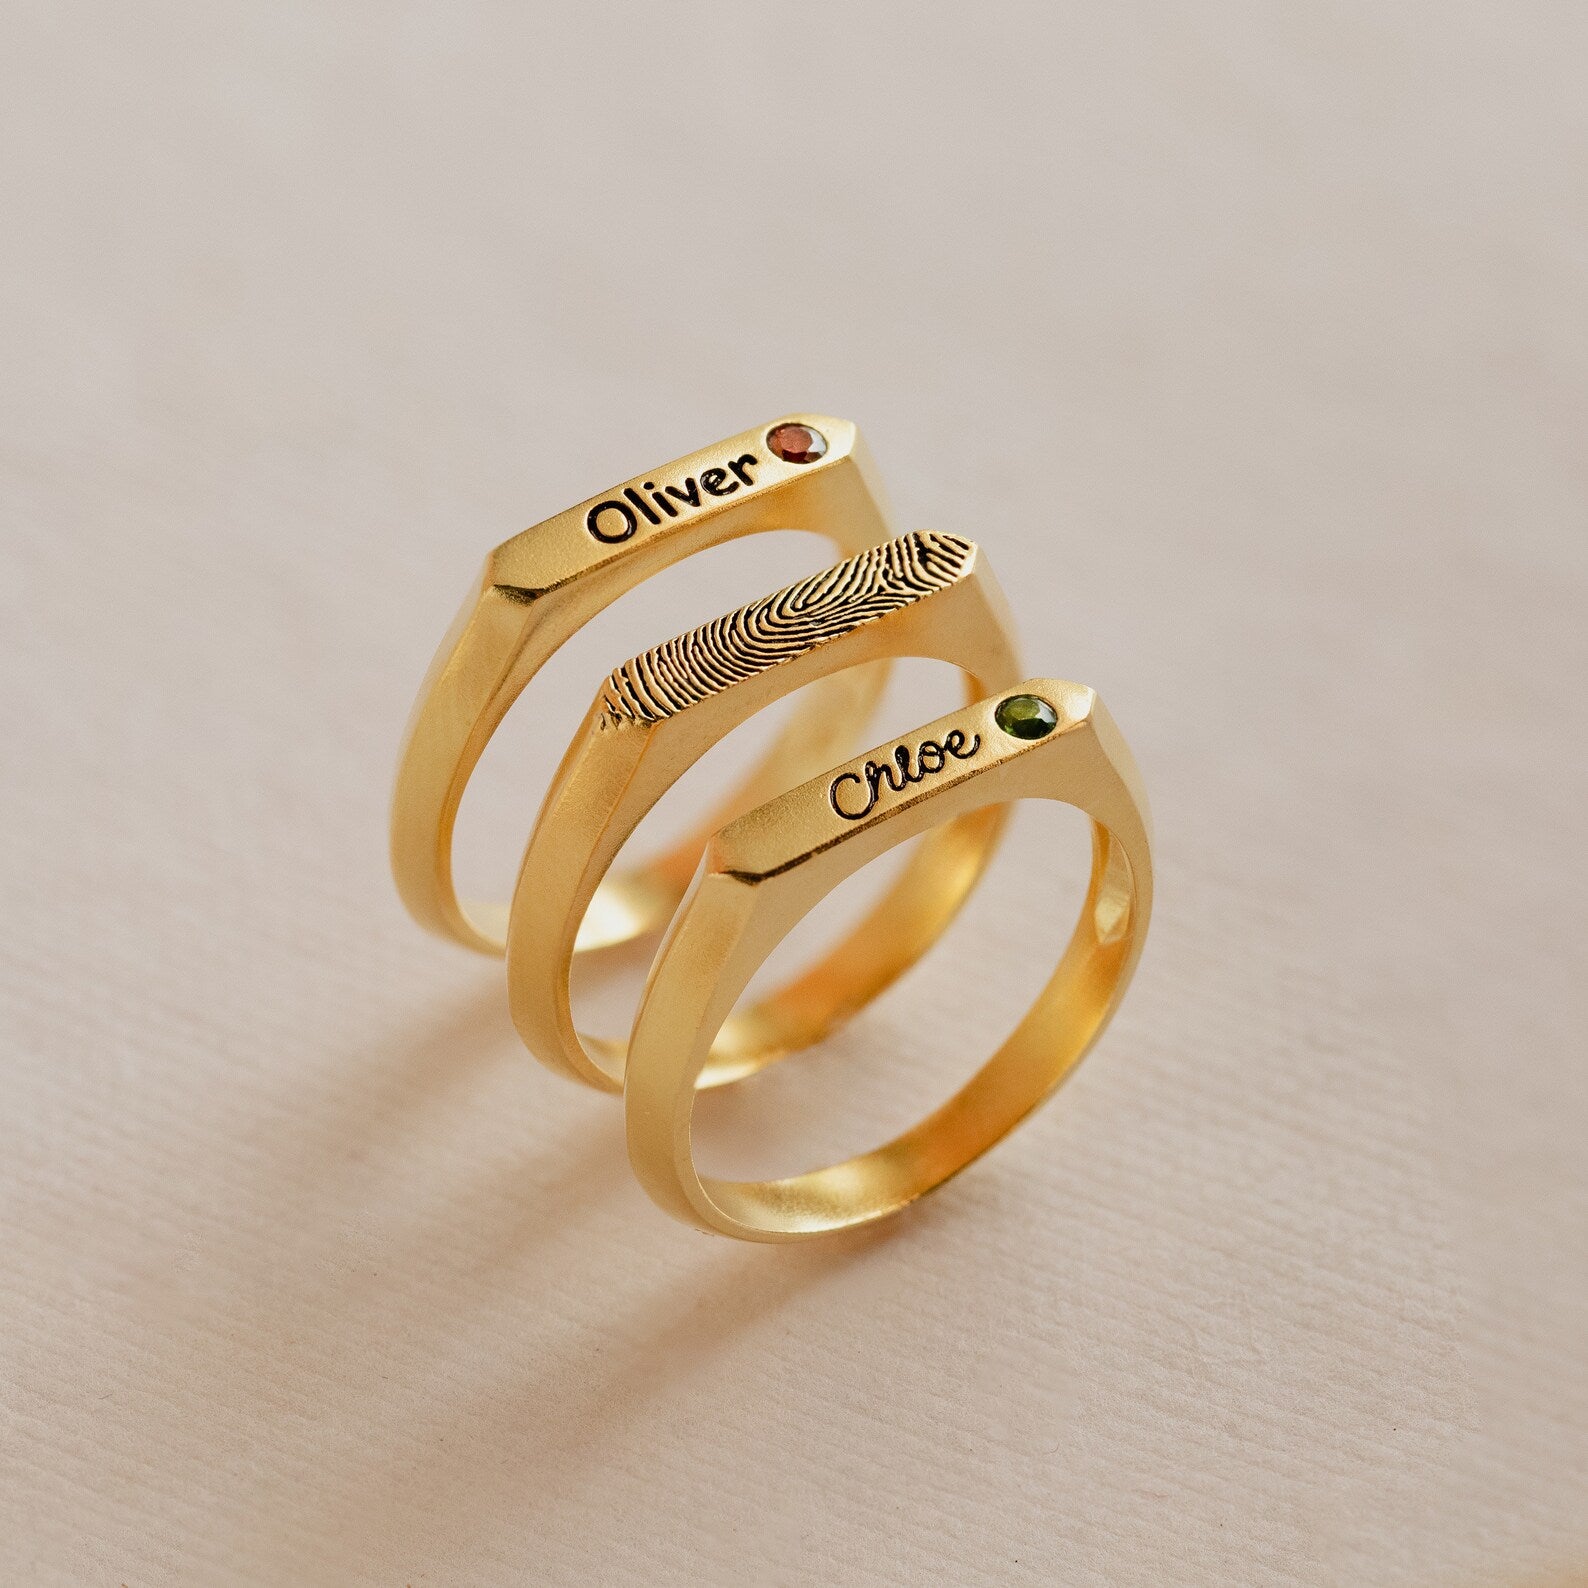 Name Rings Gold Color Heart Sprial Ring